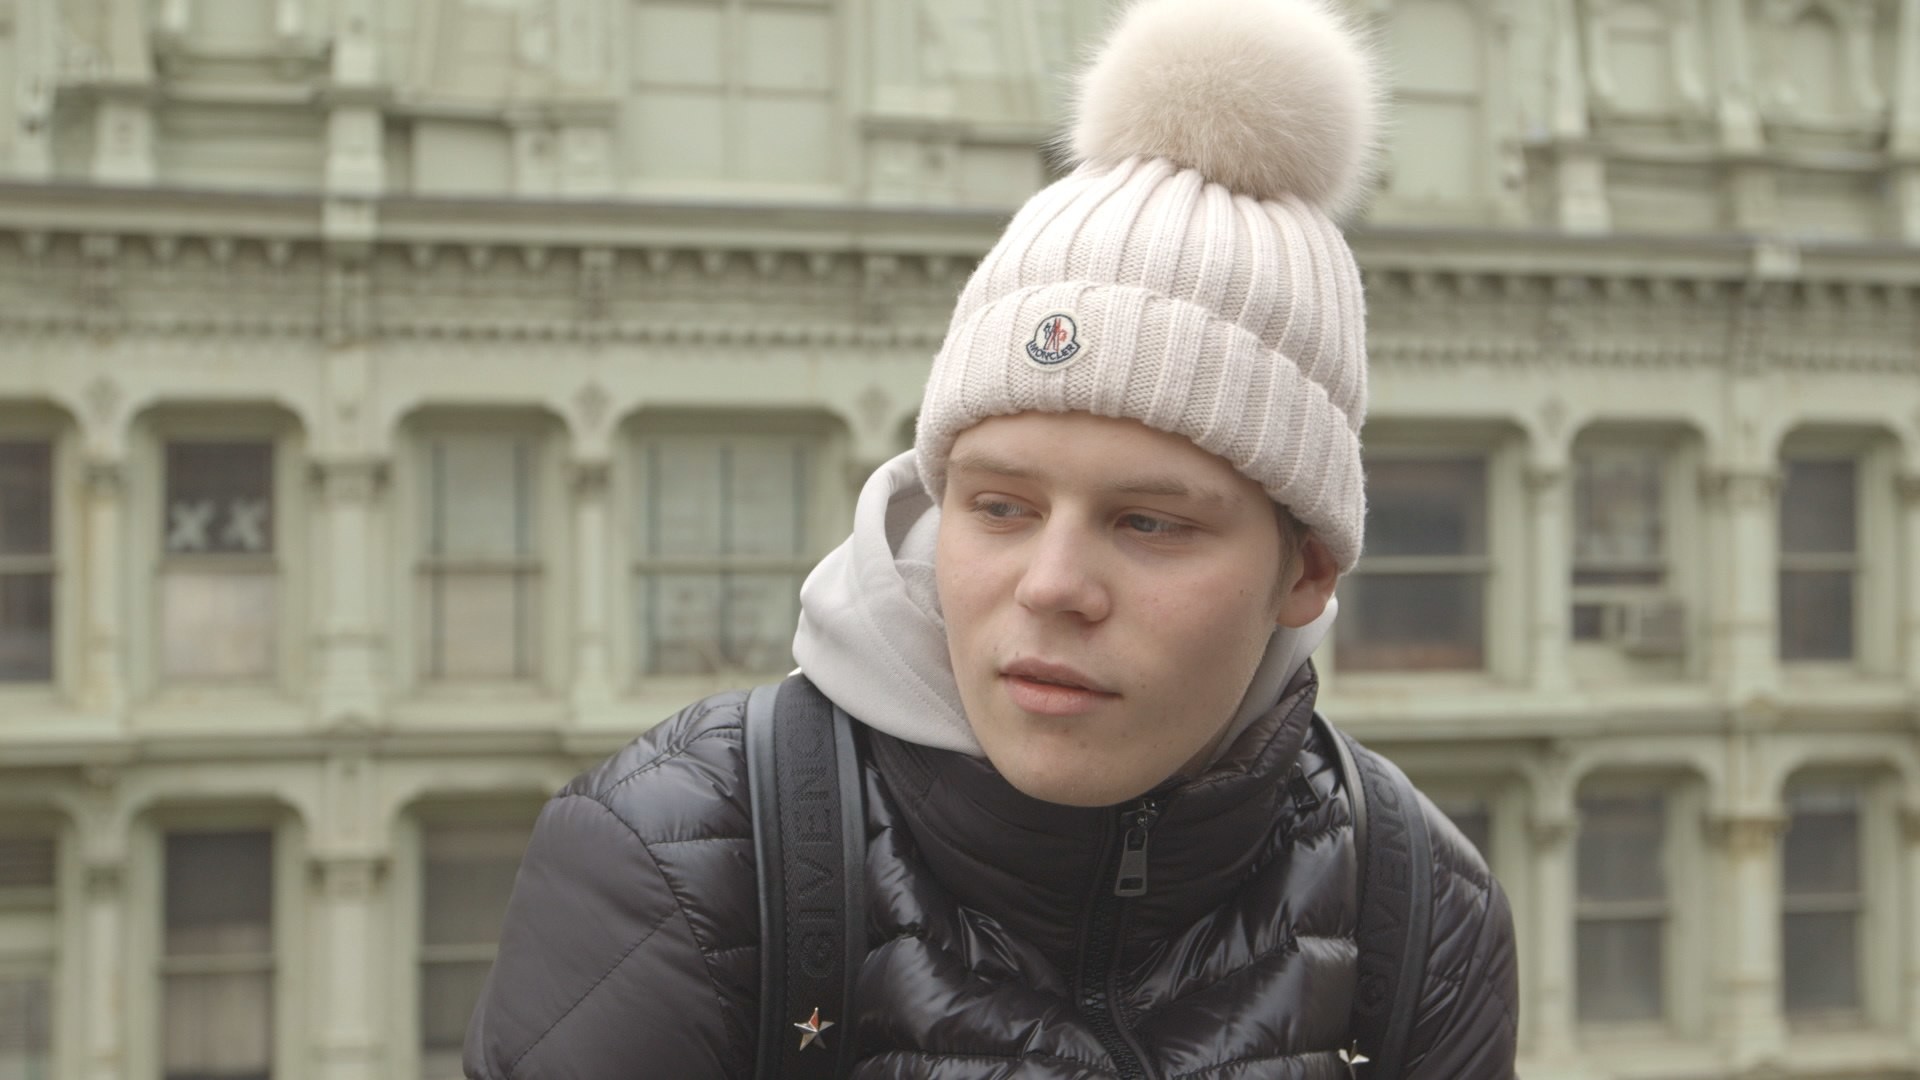 1920x1080 Yung Lean Bought All The Glittery Jeans In Downtown Brooklyn | The FADER